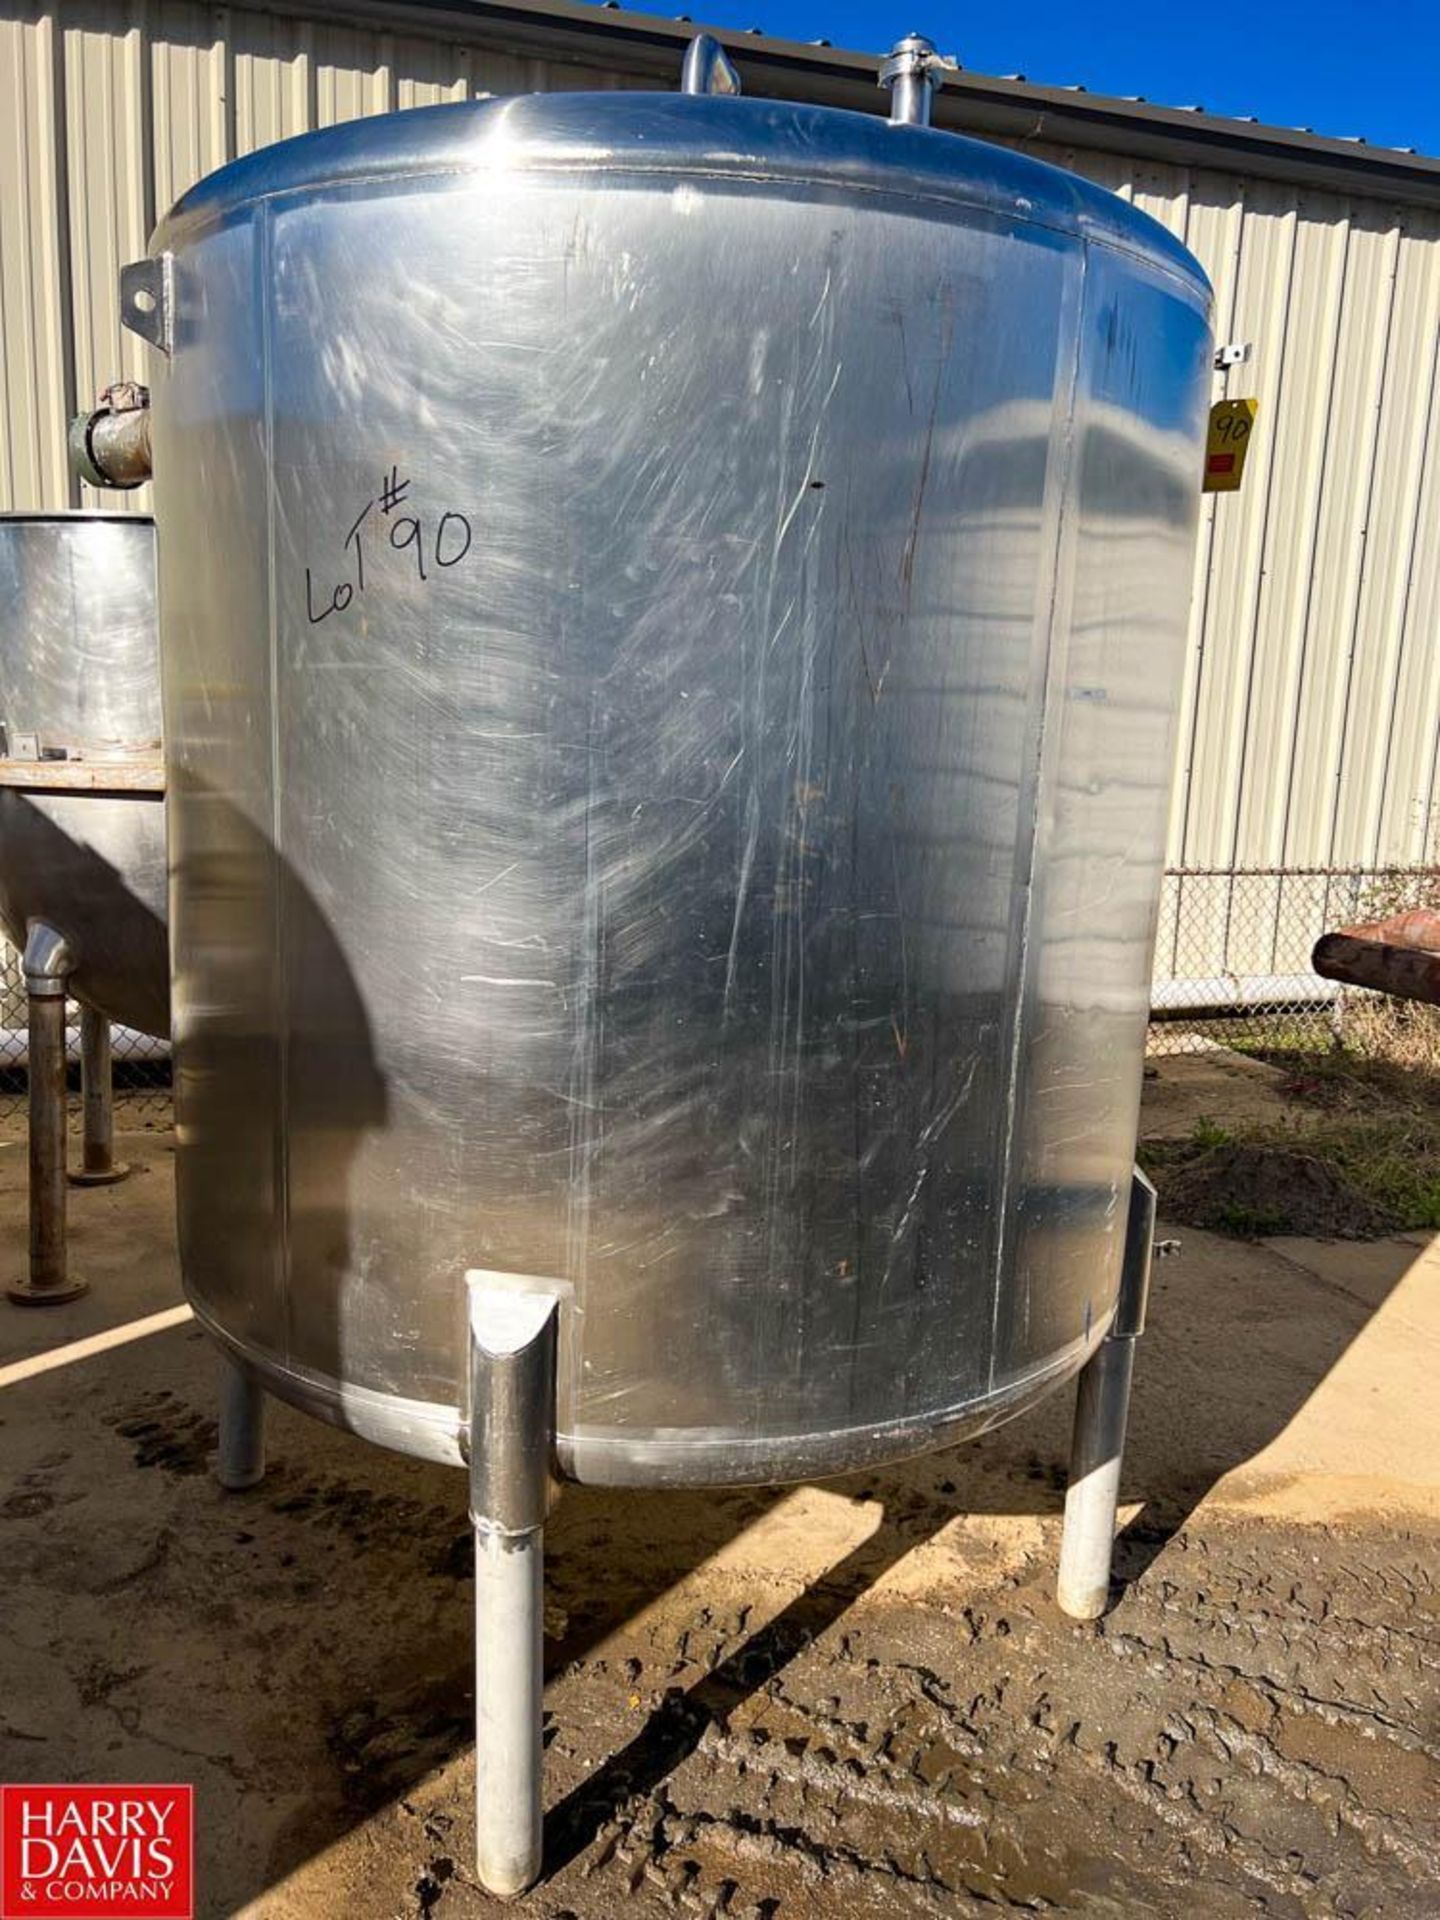 Approximately 1,000 Gallon Flat-Bottom, Dome-Top S/S Tank - Rigging Fee: $600